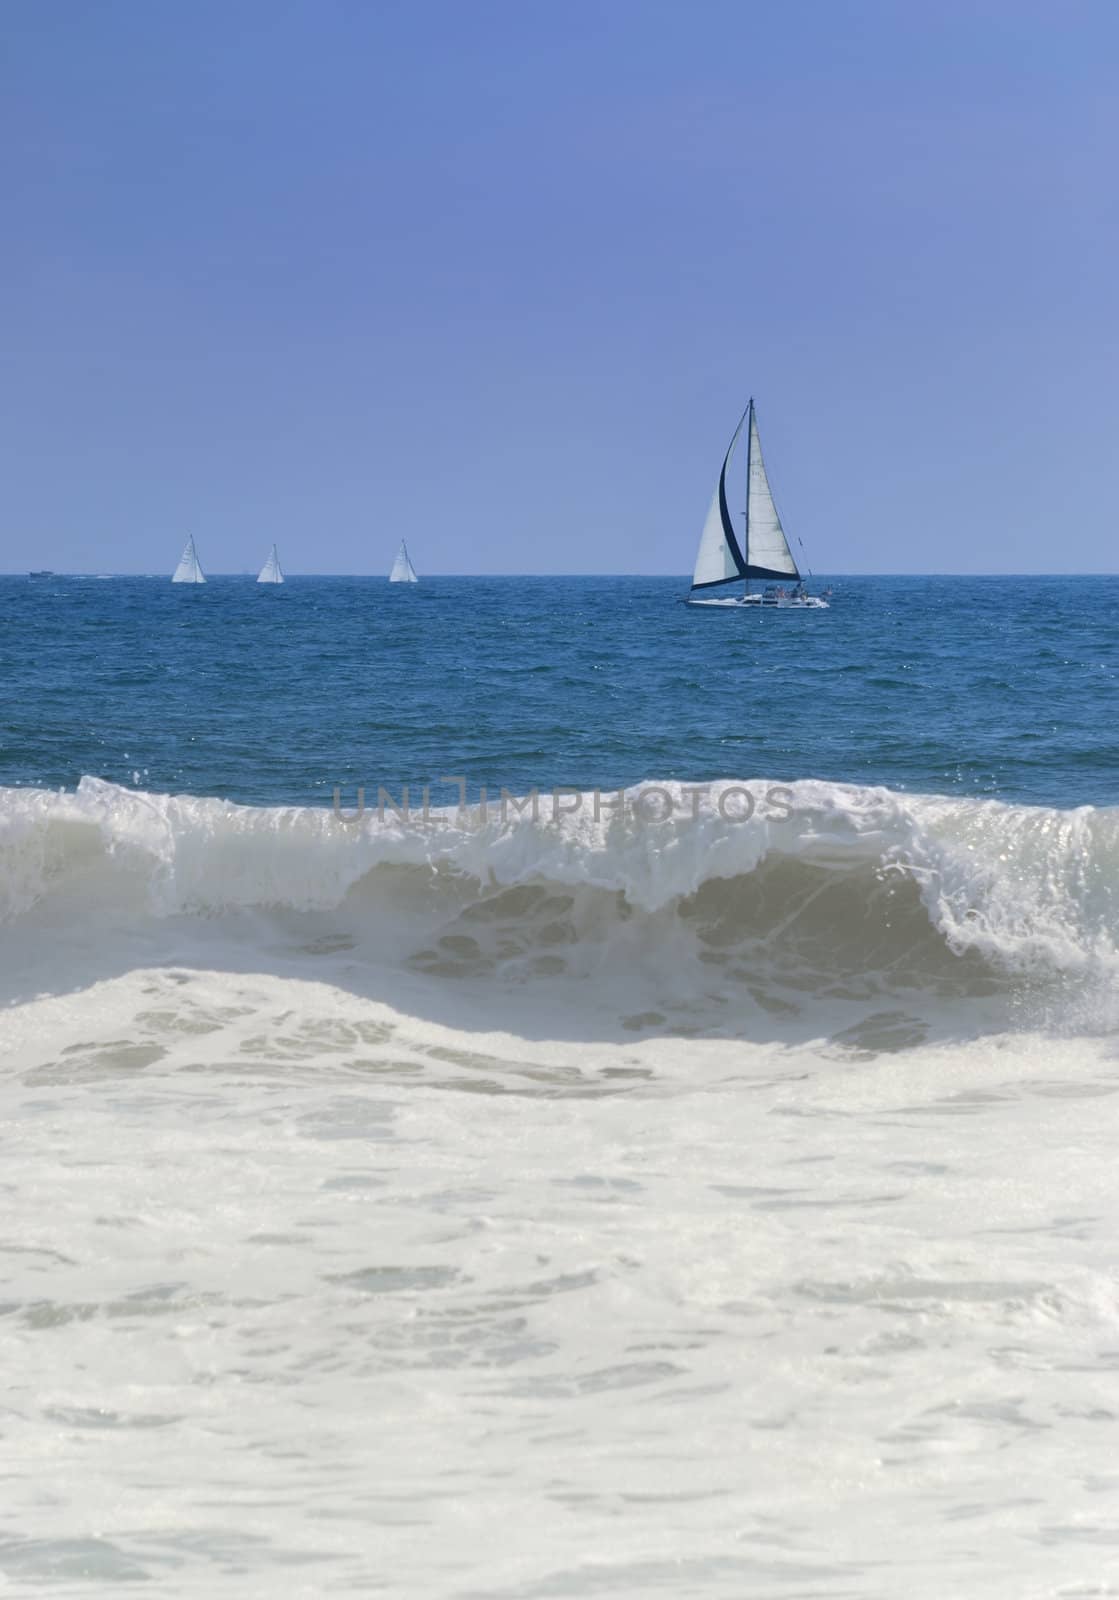 Sail boats at sea with crashing wave in foreground.